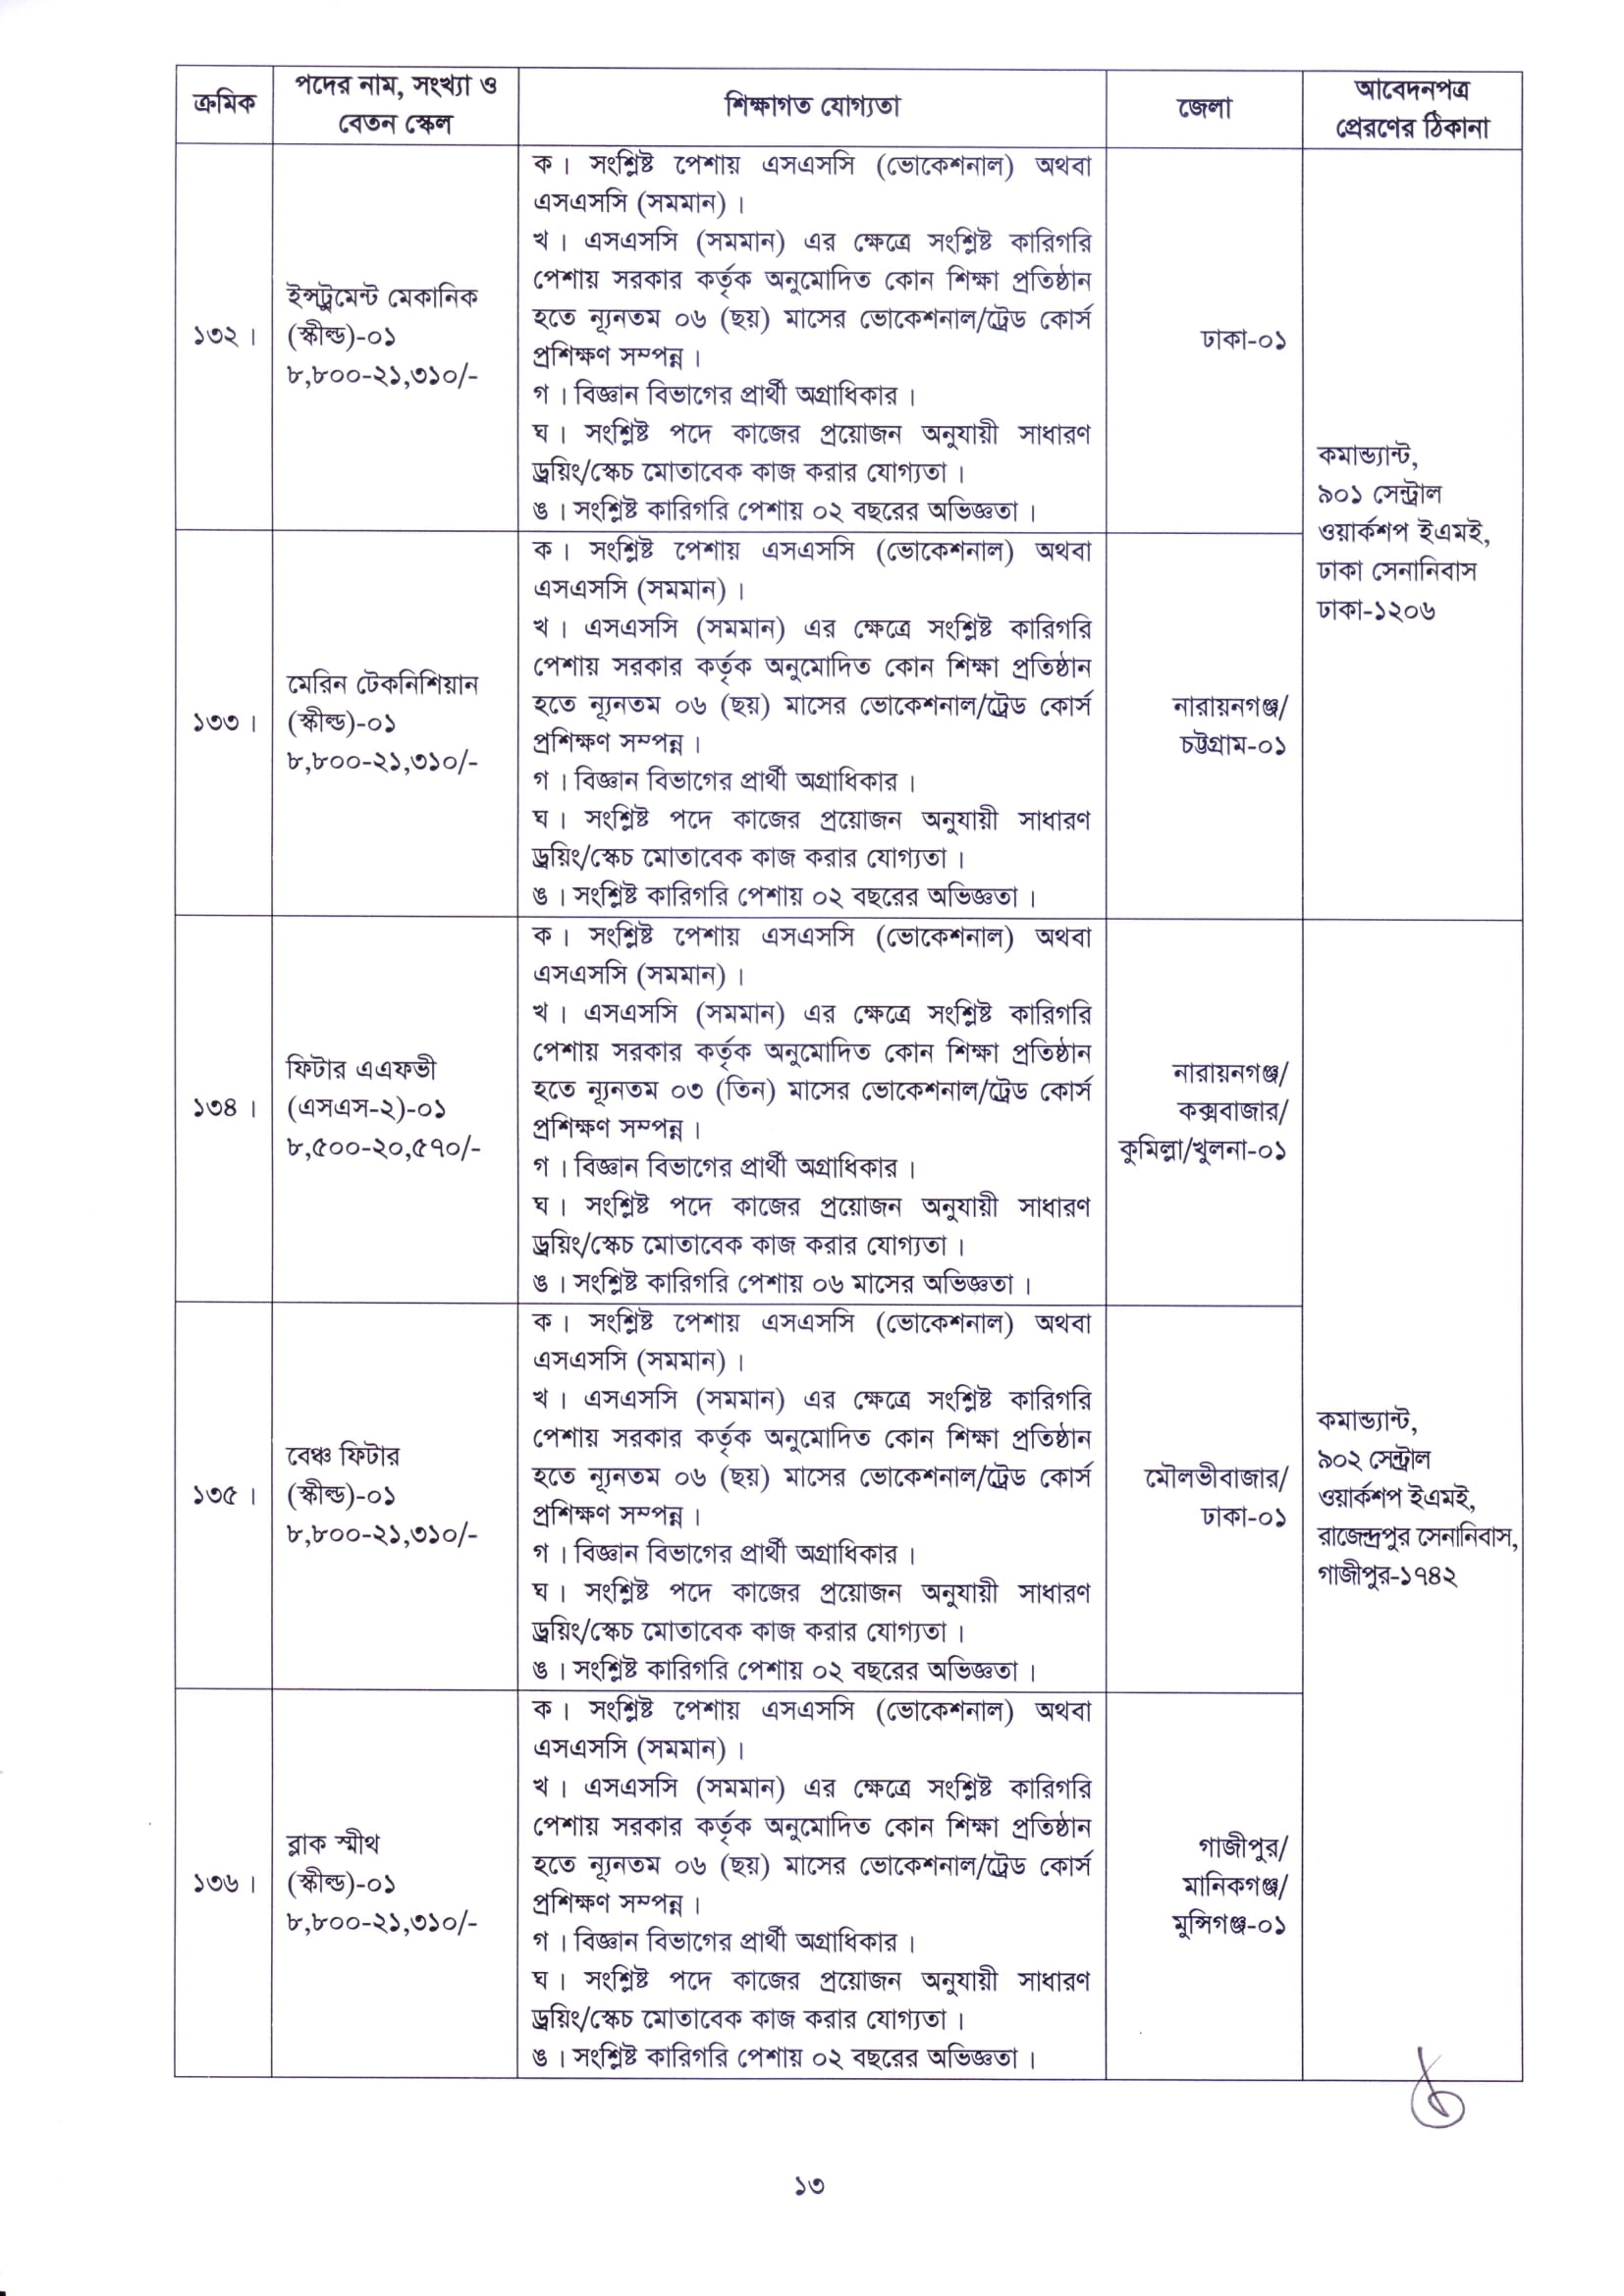 The Bangladesh Army has issued a huge recruitment circular for 239 civilian permanent posts.